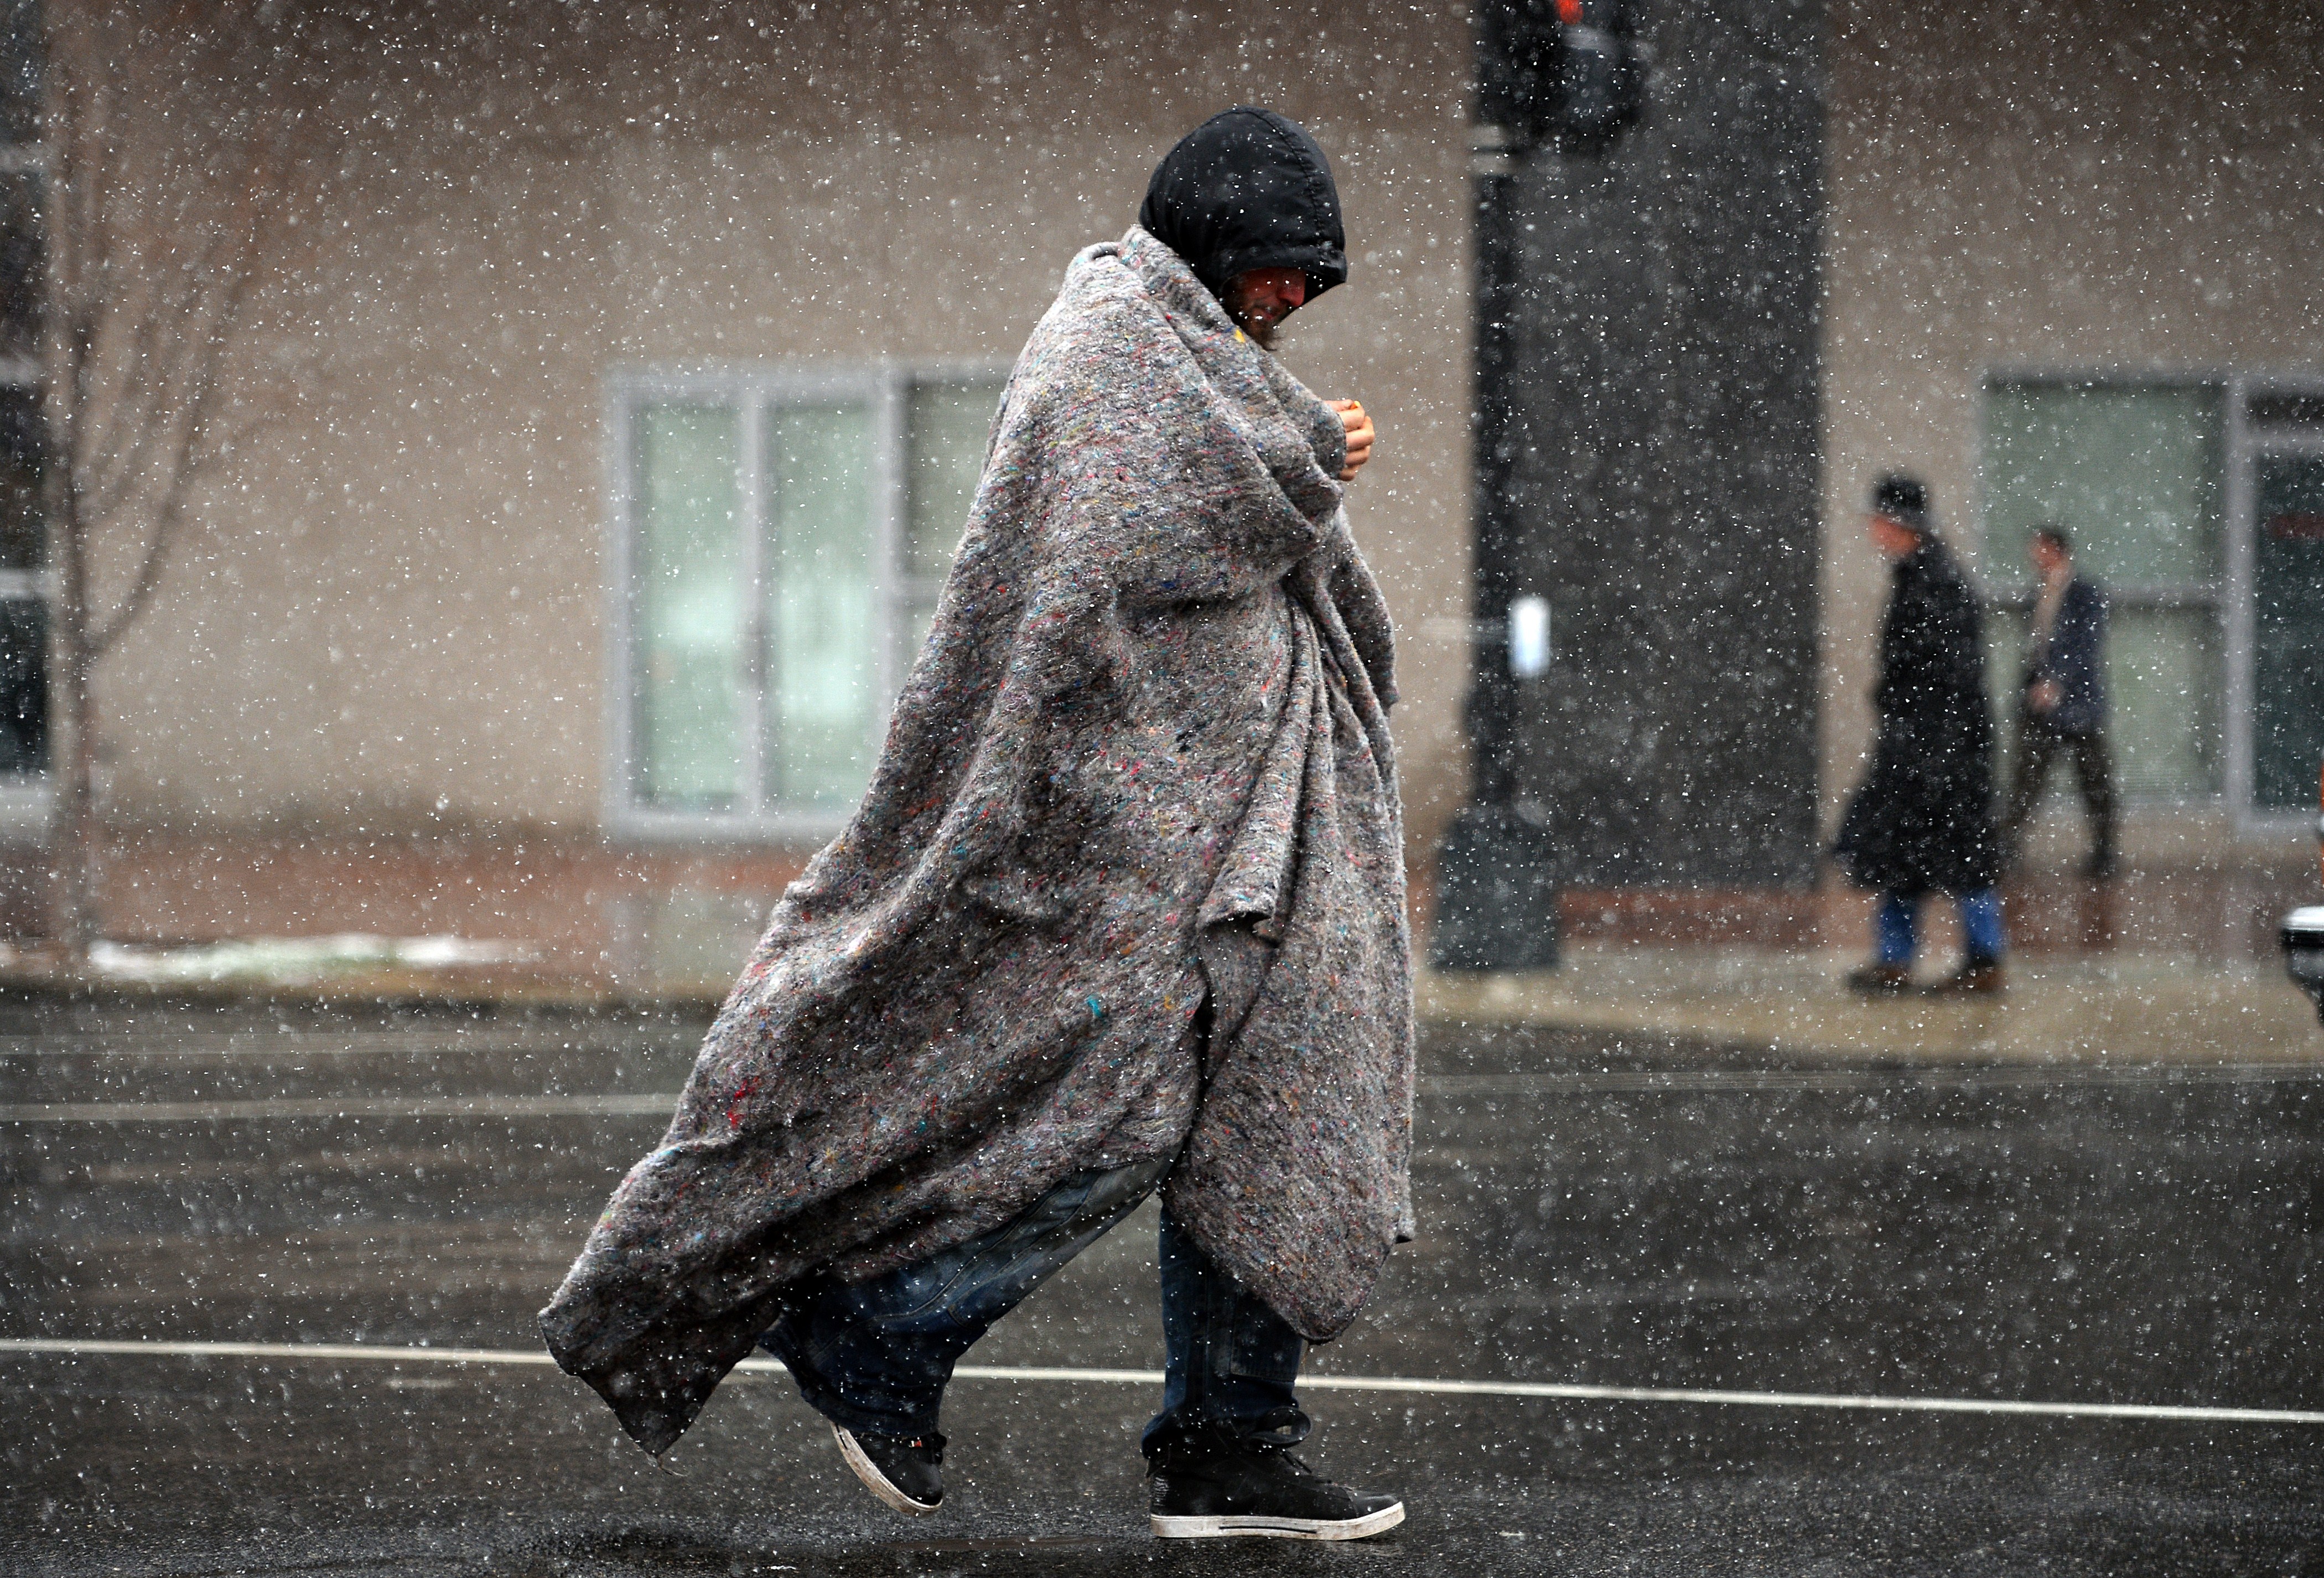 A man covers himself as he crosses a street under a snowfall in Washington, D.C. on March 25, 2014. (Jewel Samad—AFP/Getty Images)